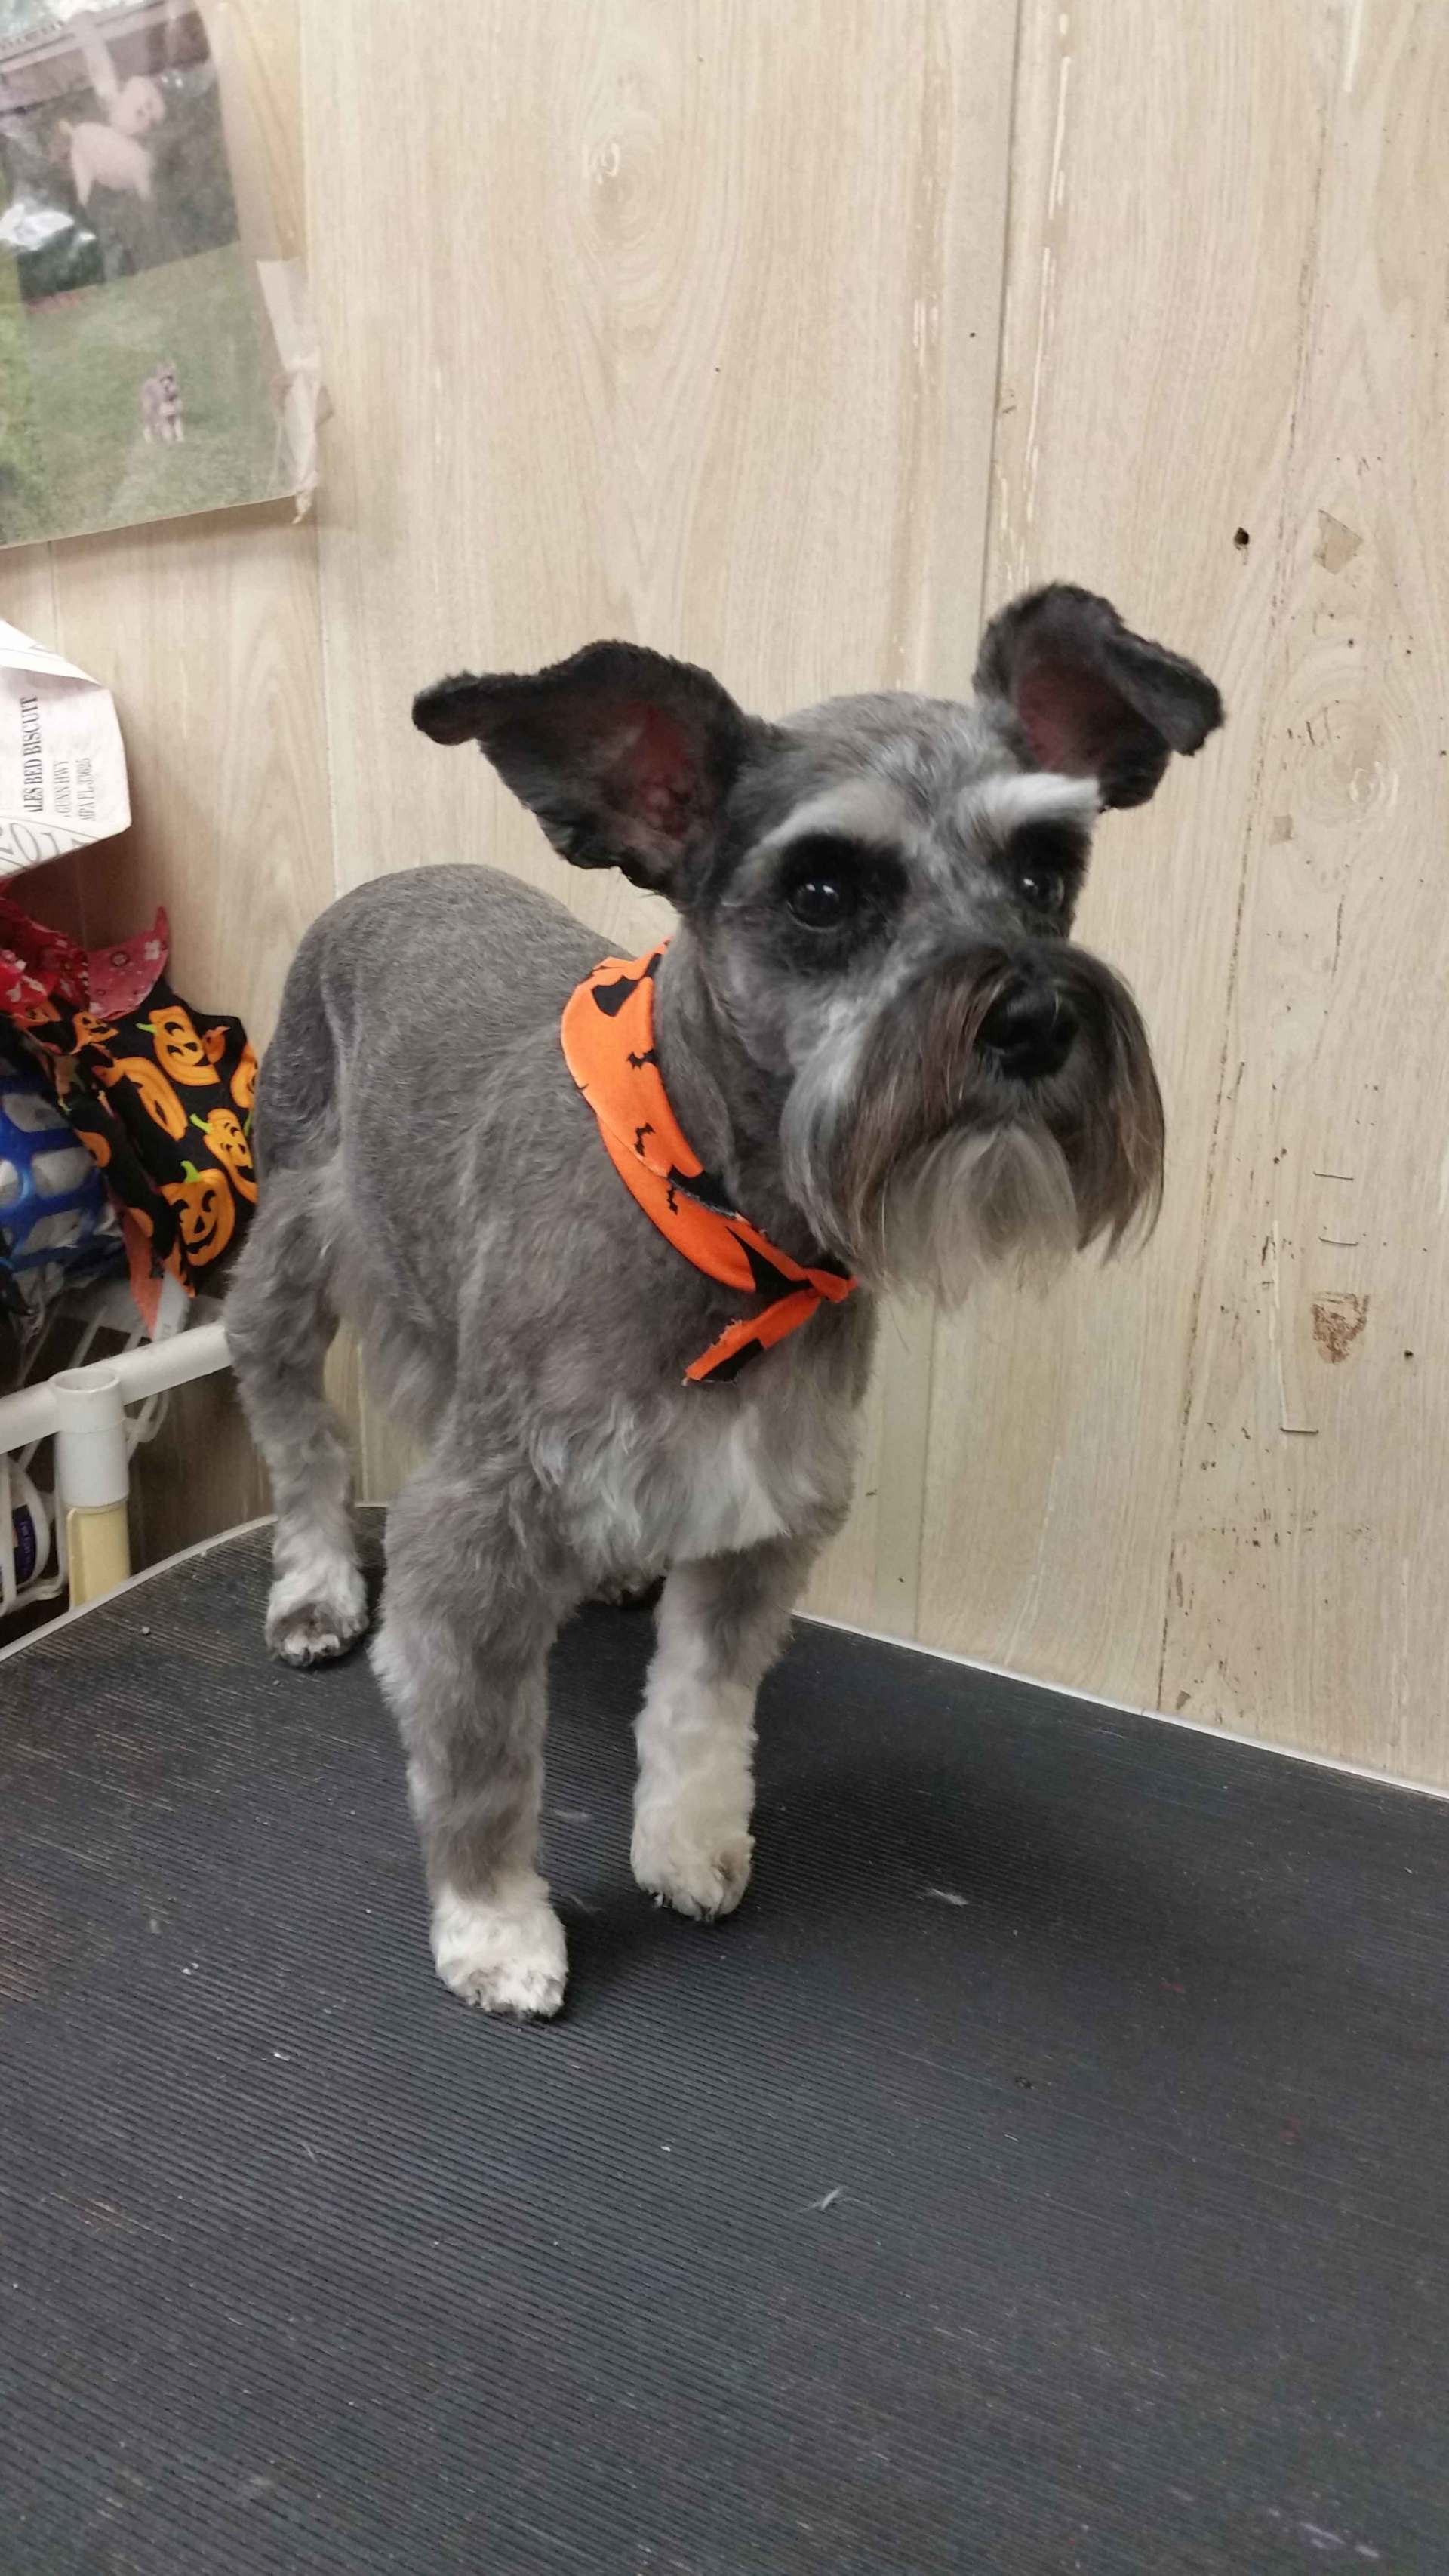 Dog with orange collar — Pet Grooming Services in Tampa,, FL